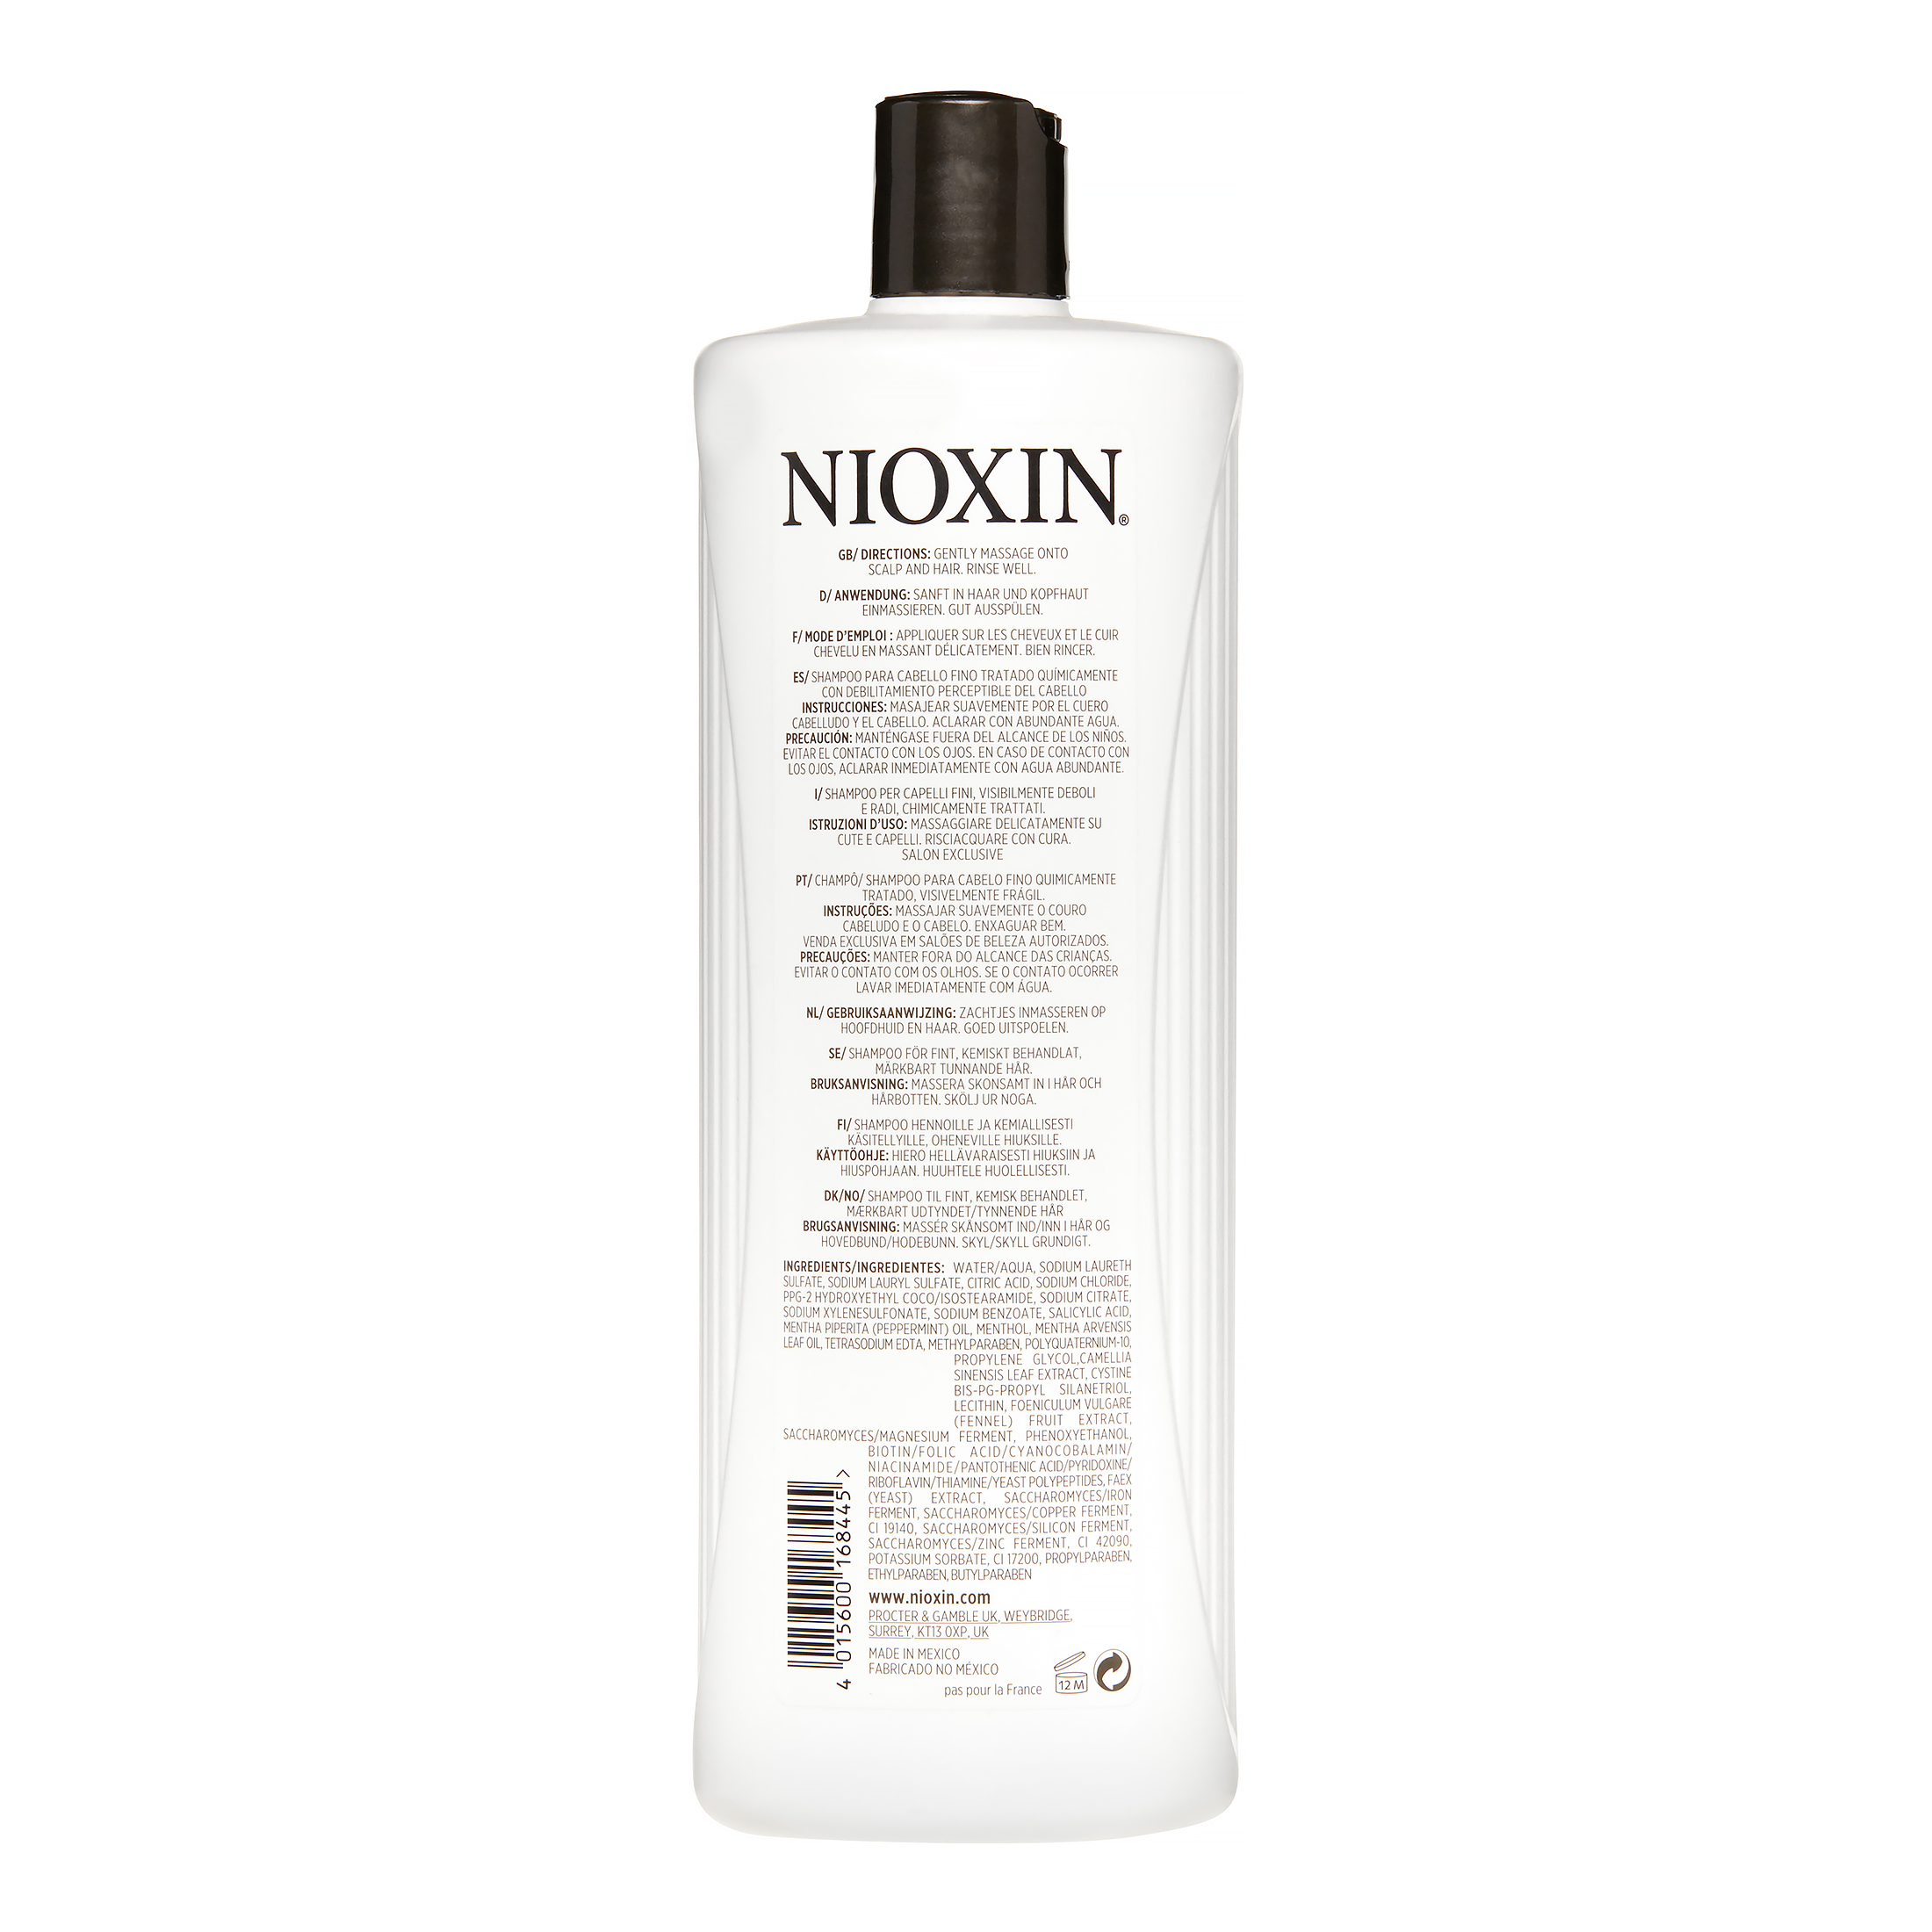 Nioxin System 4 Cleanser Shampoo 1 Liter/33.8Oz, Cyber Monday Deal! - image 4 of 4